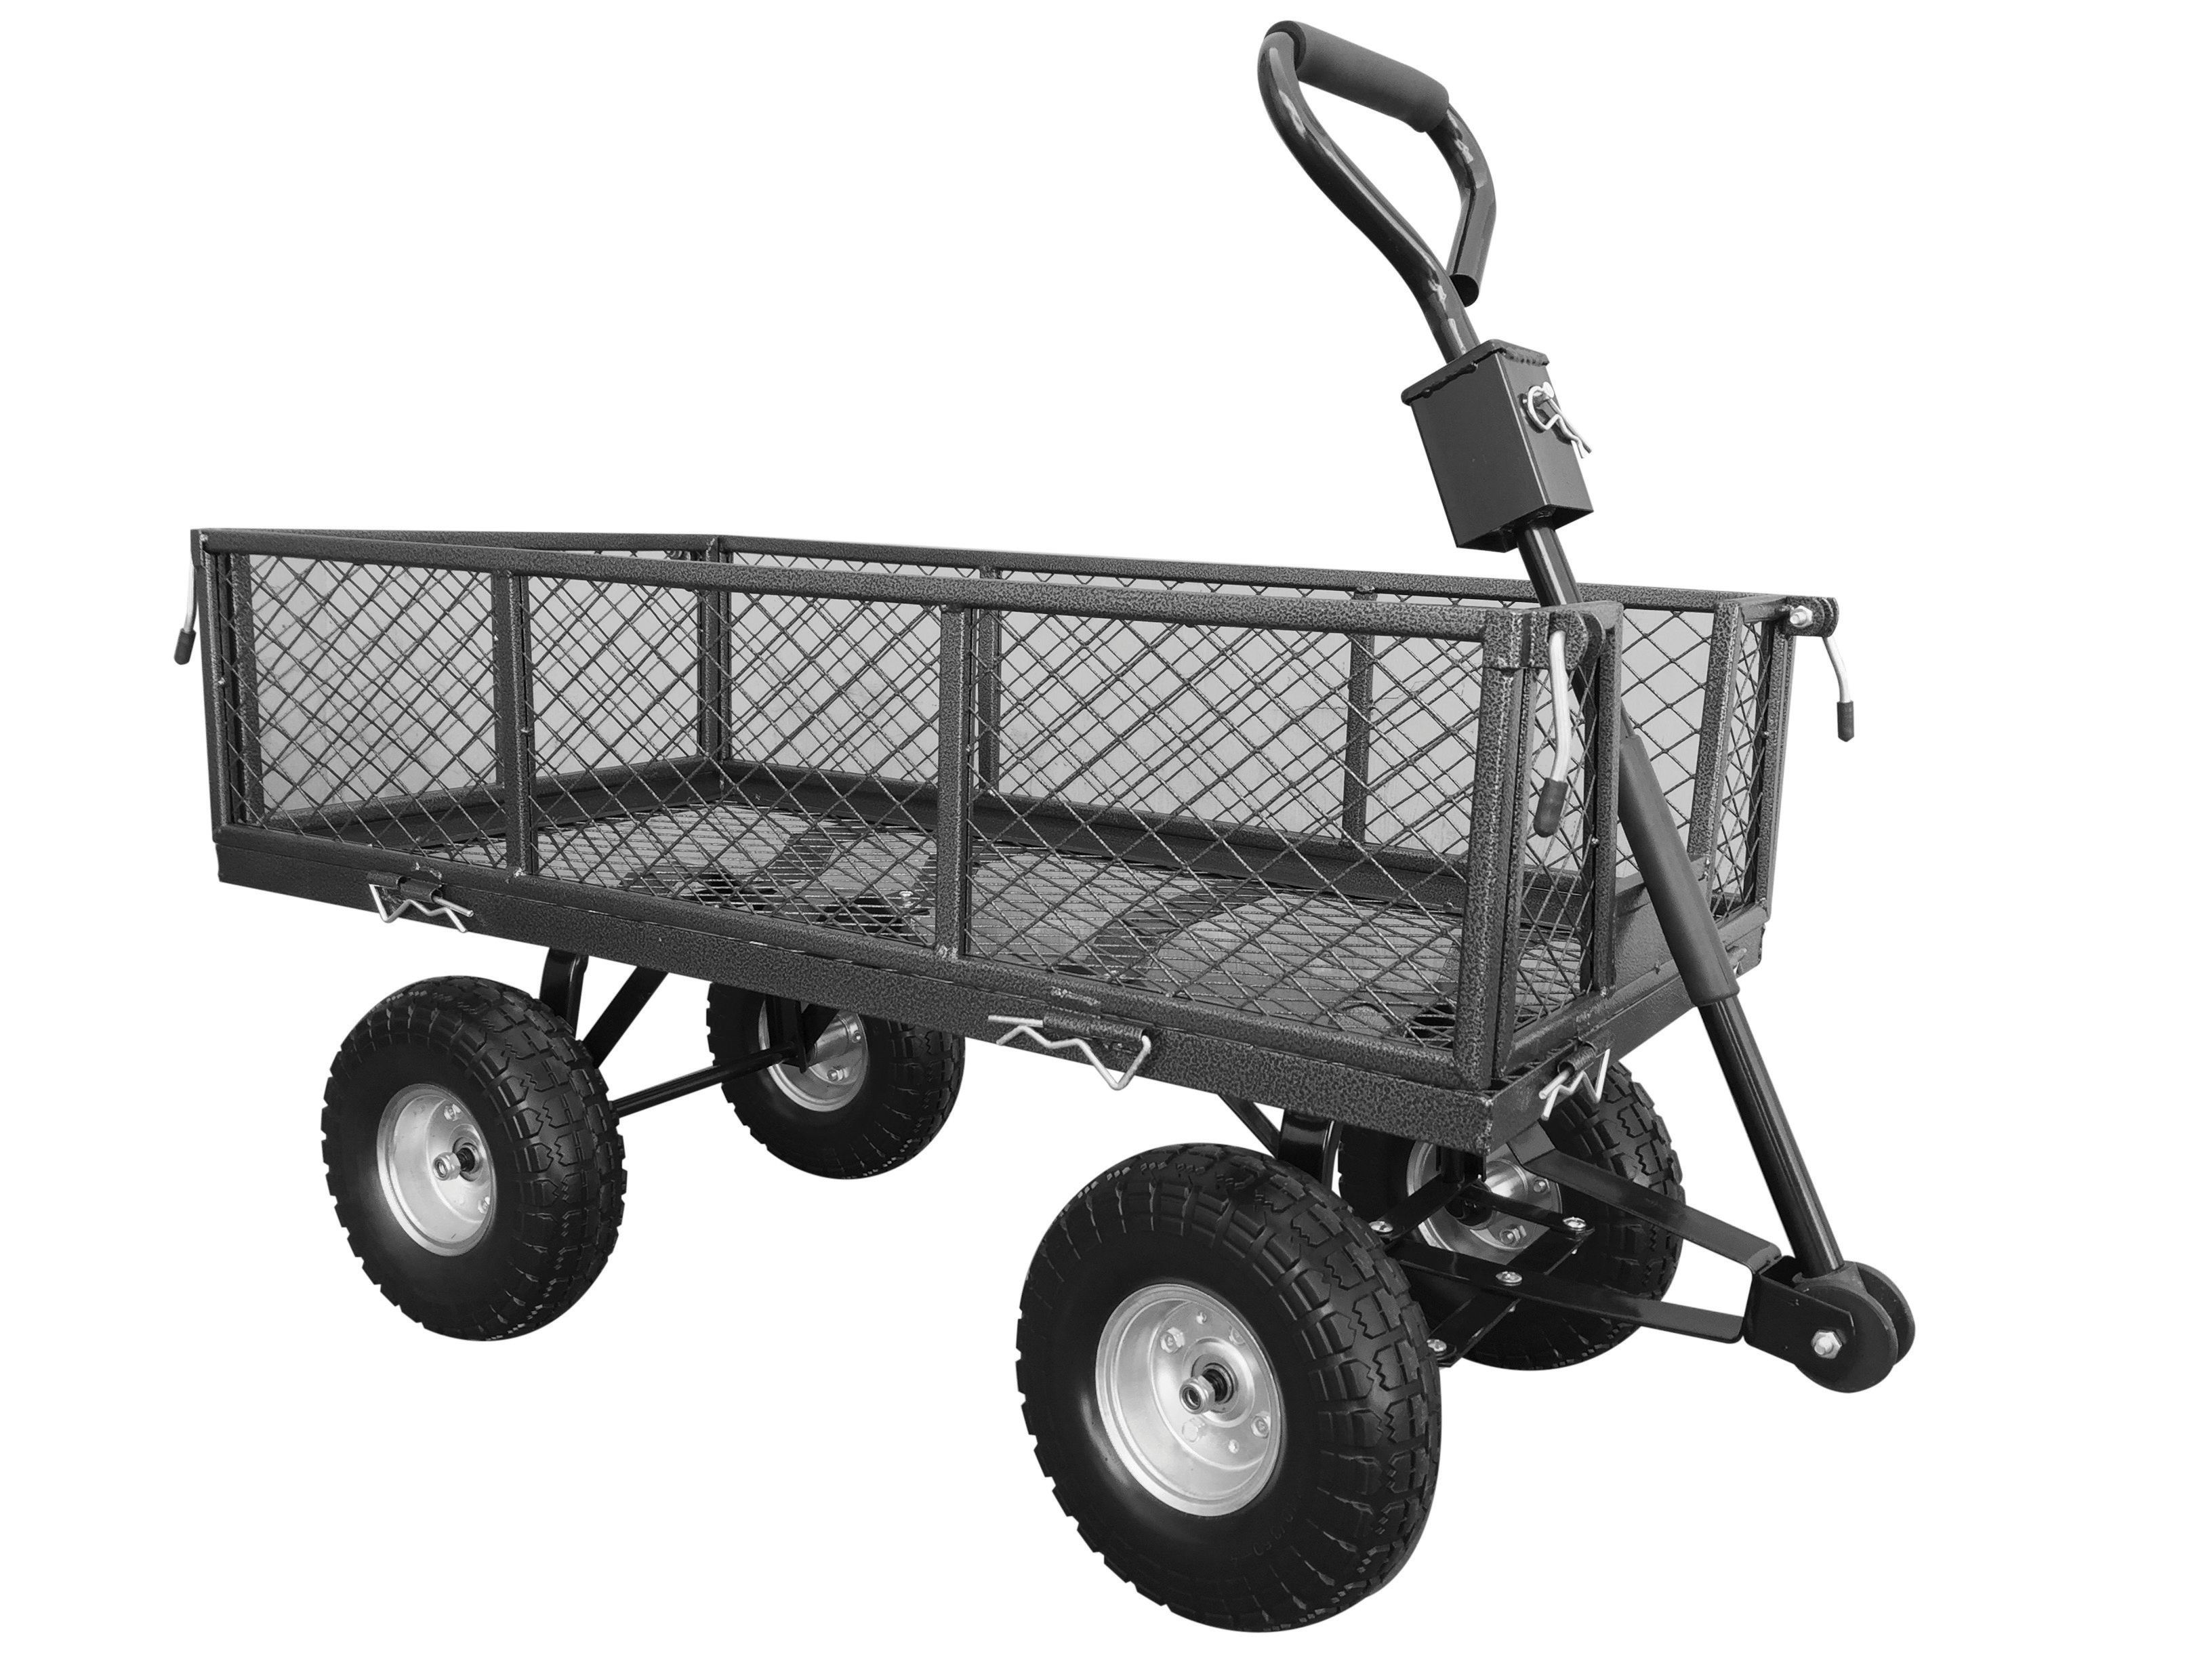 Image of The Handy Compact Garden Trolley